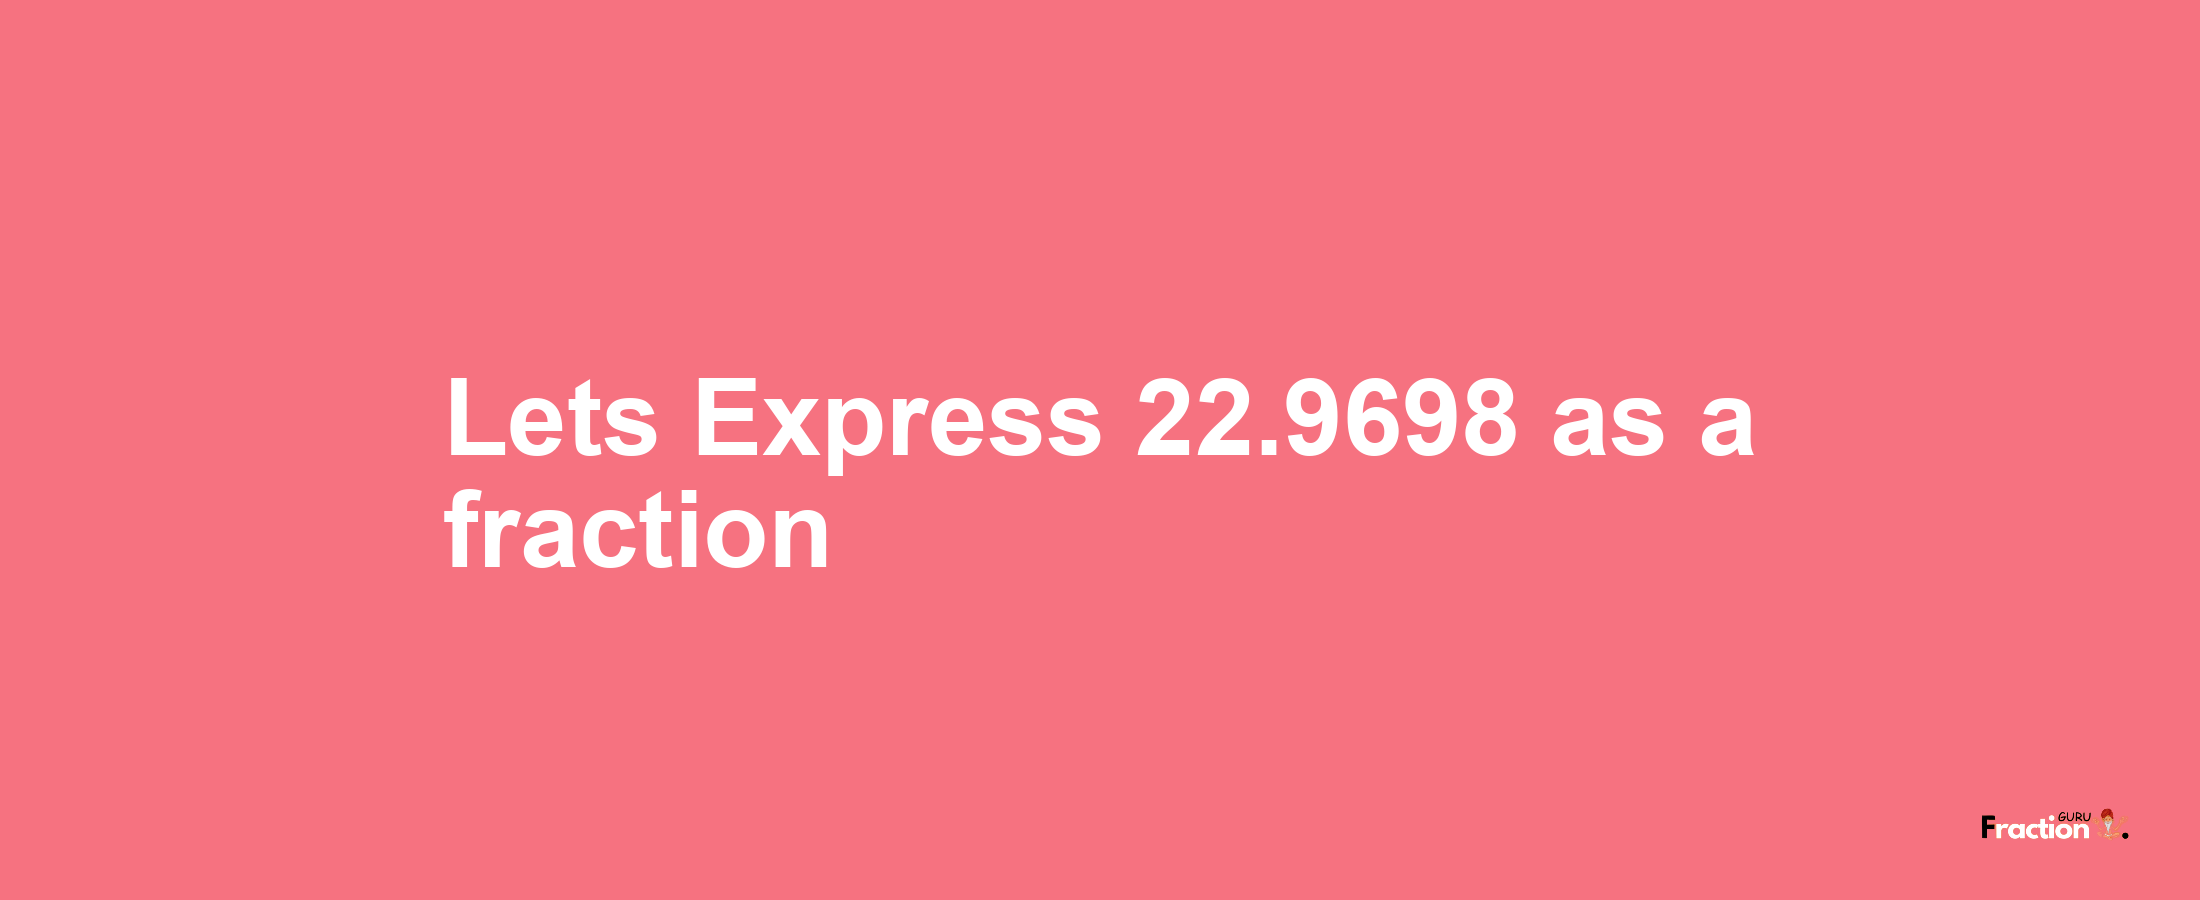 Lets Express 22.9698 as afraction